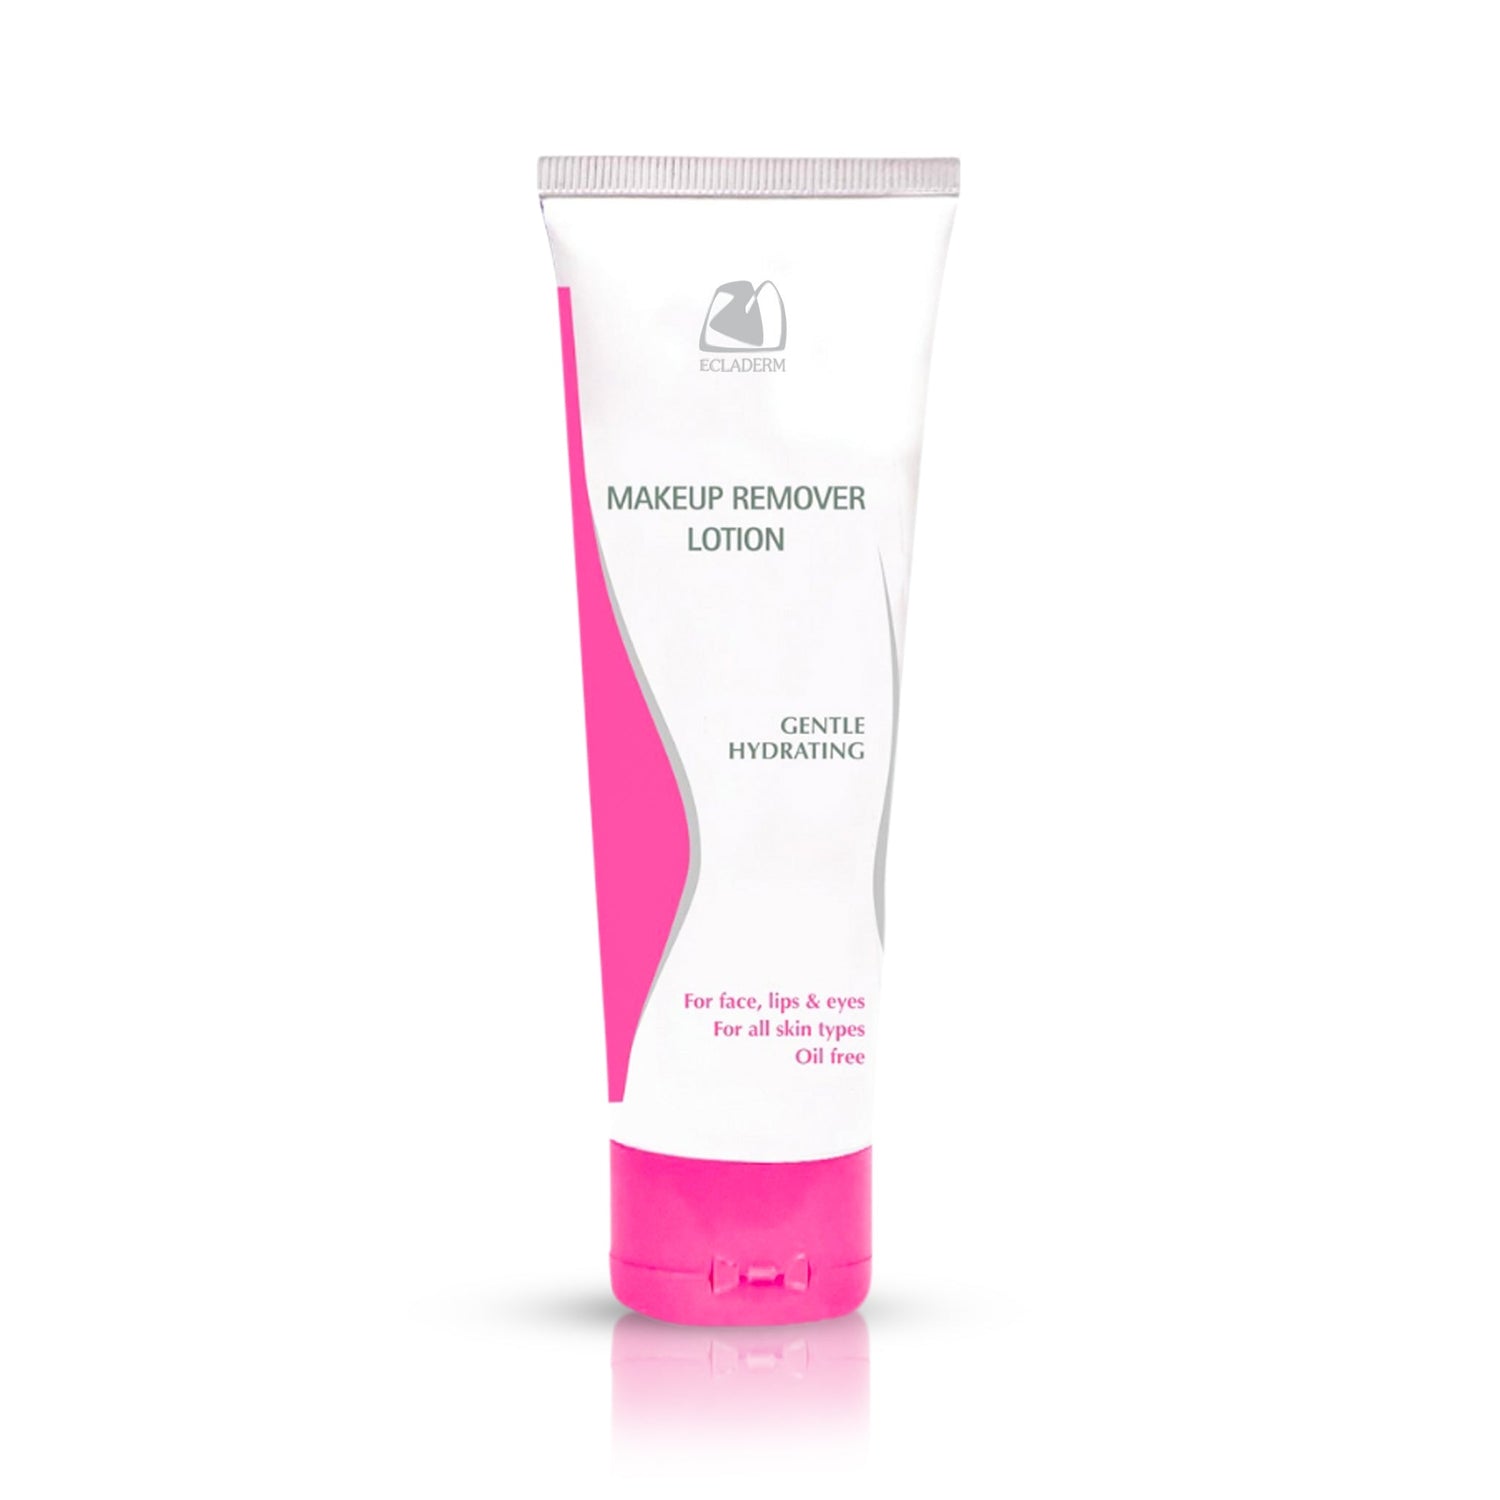 Ecladerm Makeup Remover Lotion is gentle and hydrating for face and eyes 